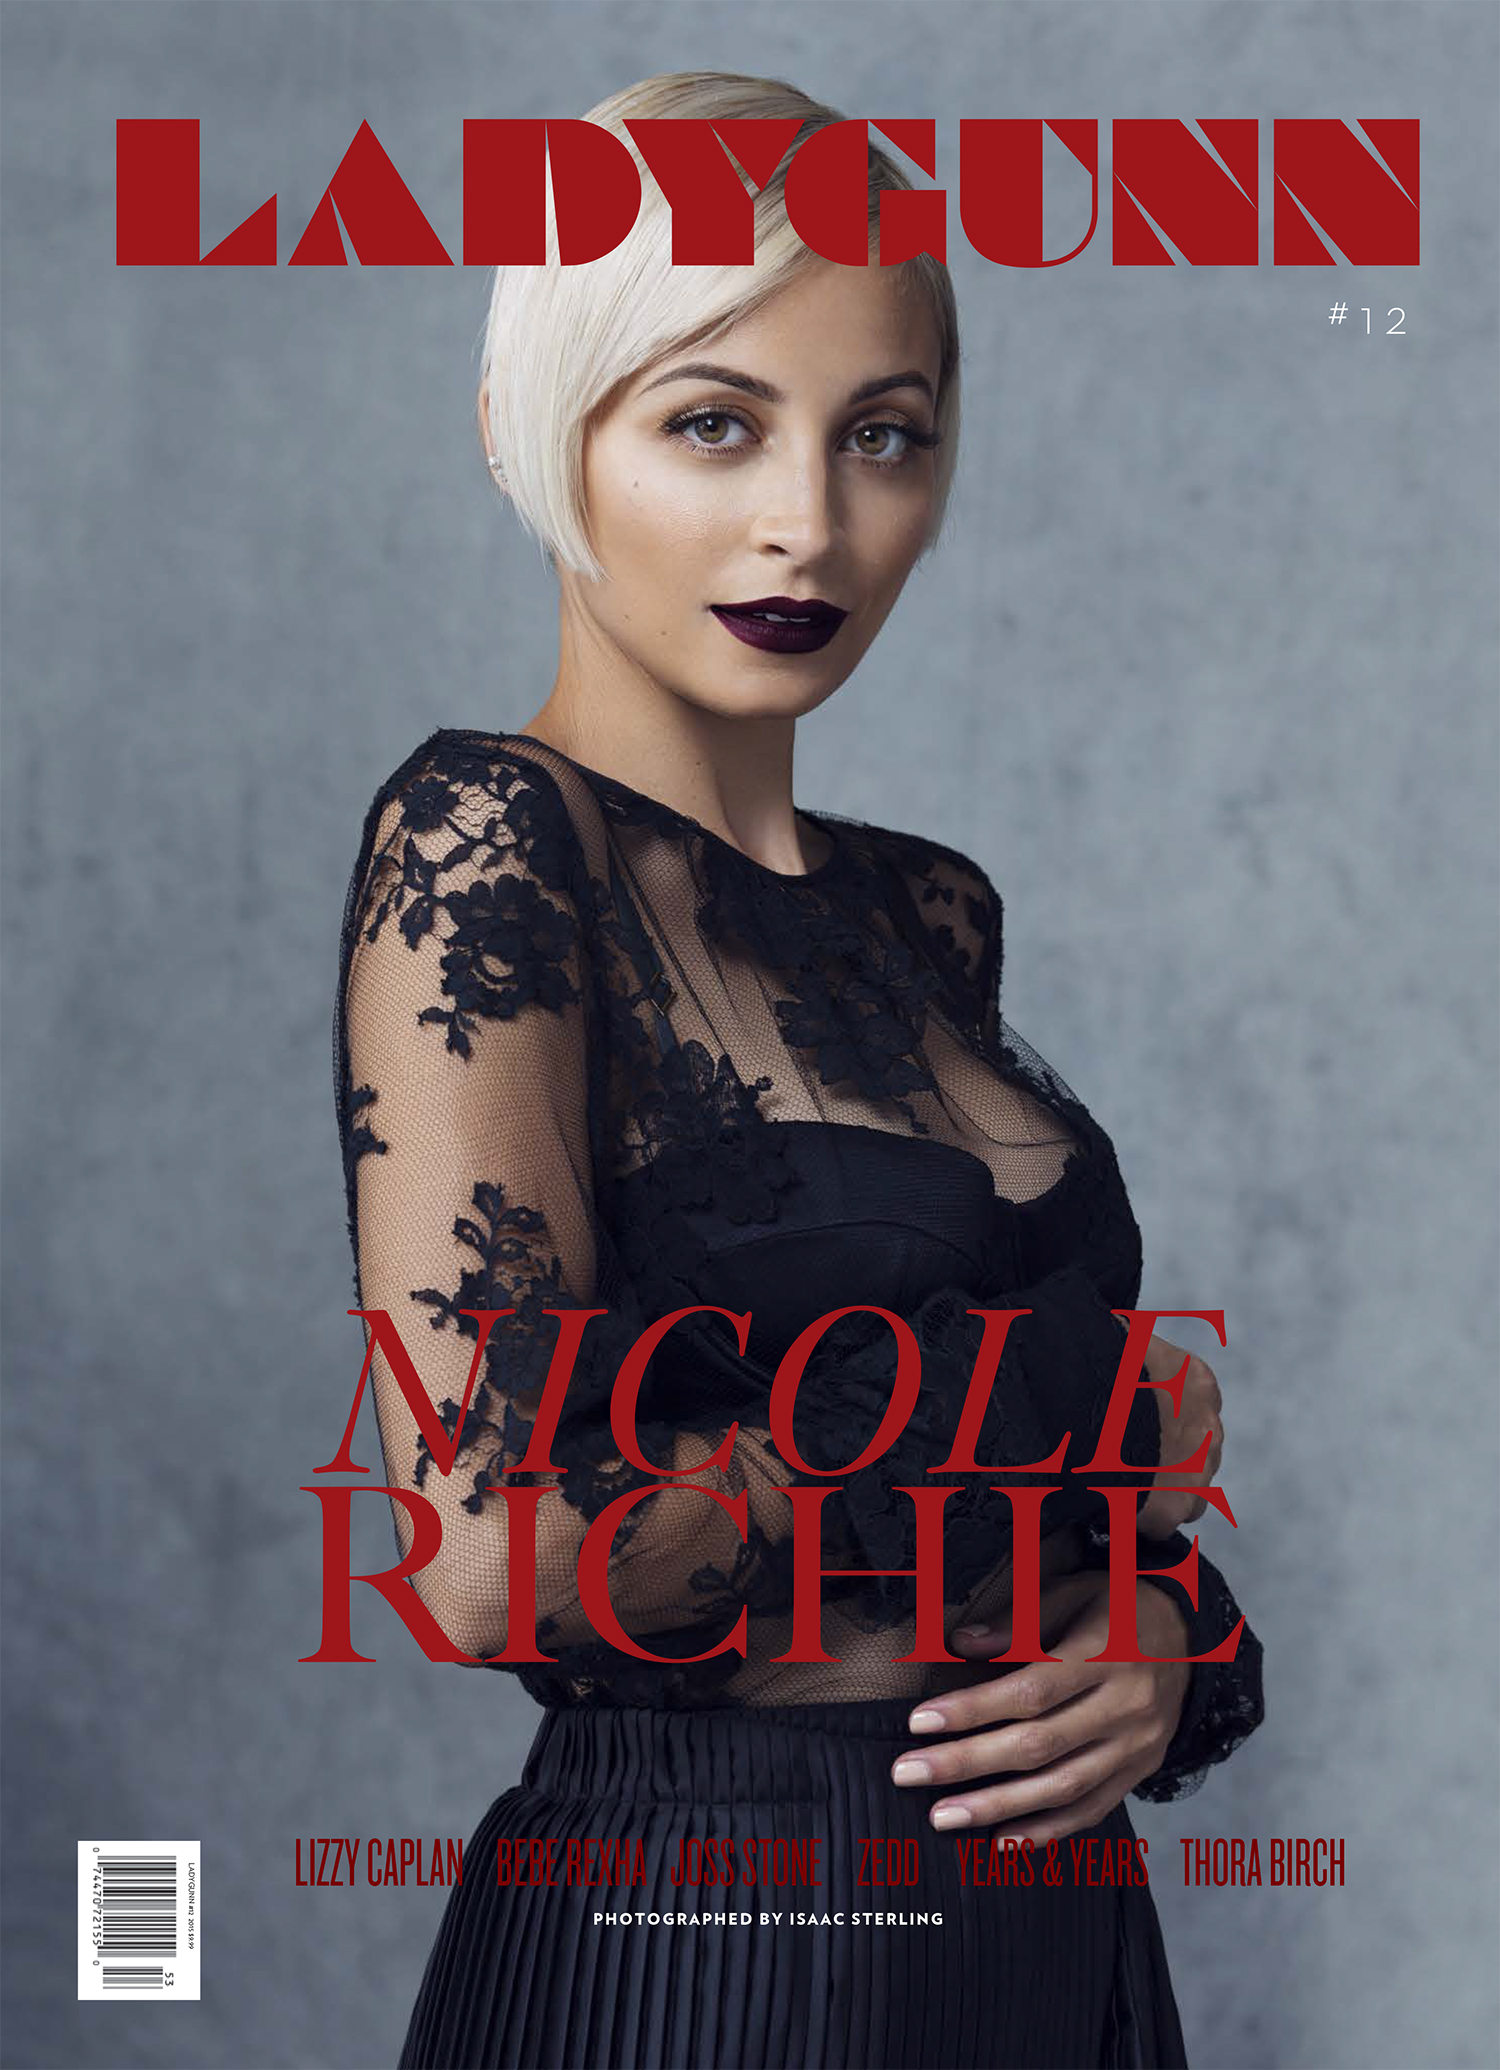 LADYGUNN #12 NICOLE RICHIE PRINT–SOLD OUT